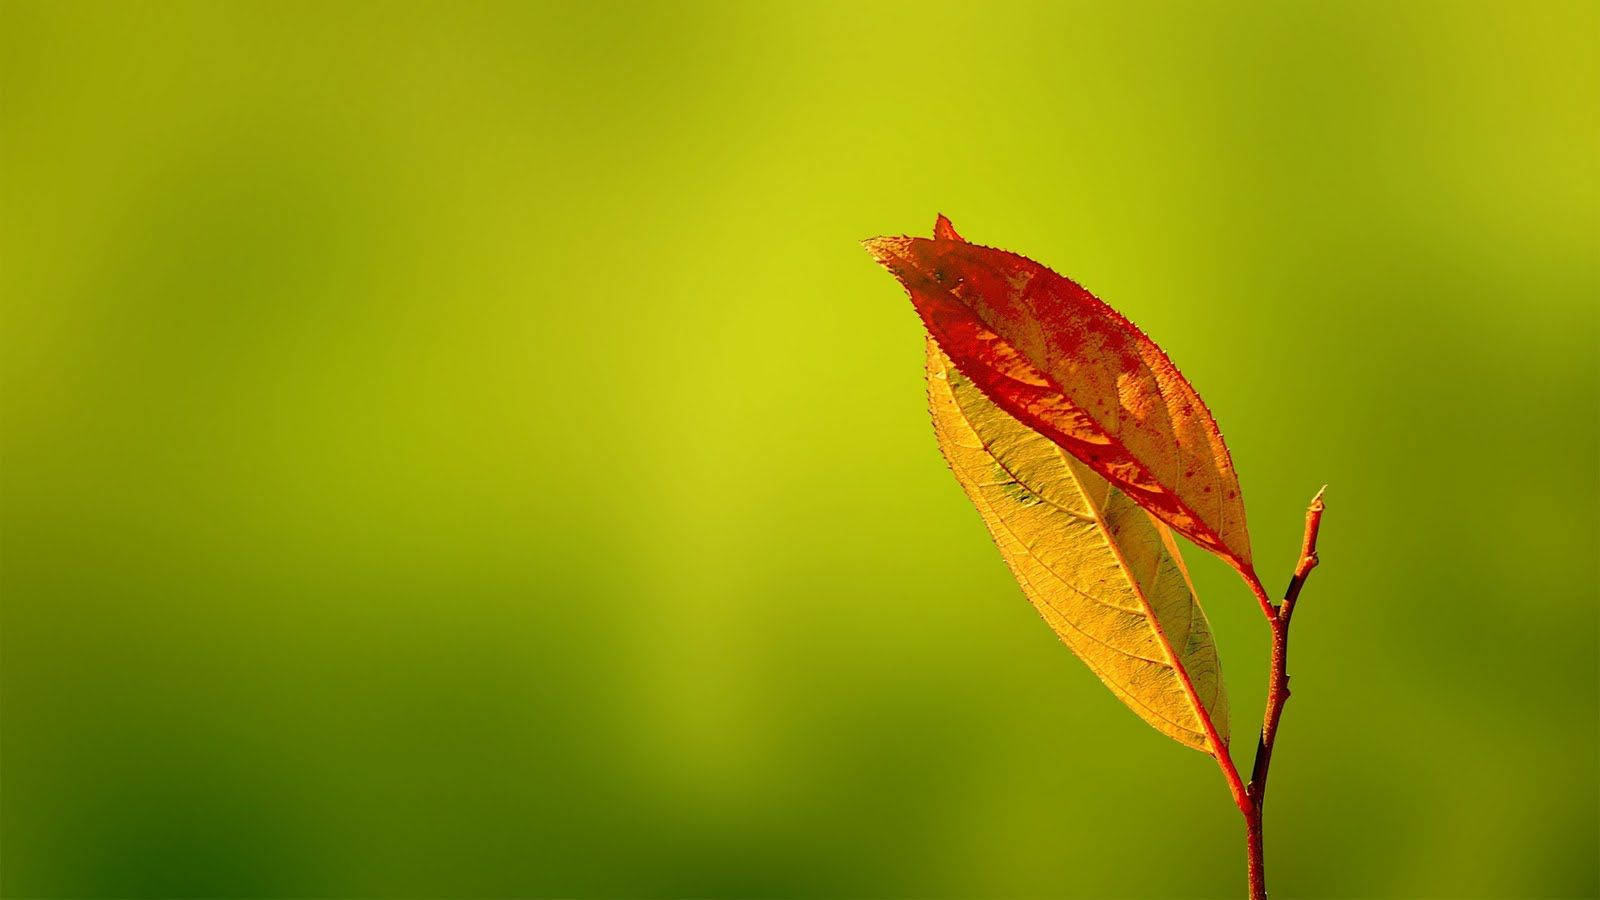 Enjoy The Beautiful Vibrancy Of This Orange And Yellow Leaf! Background